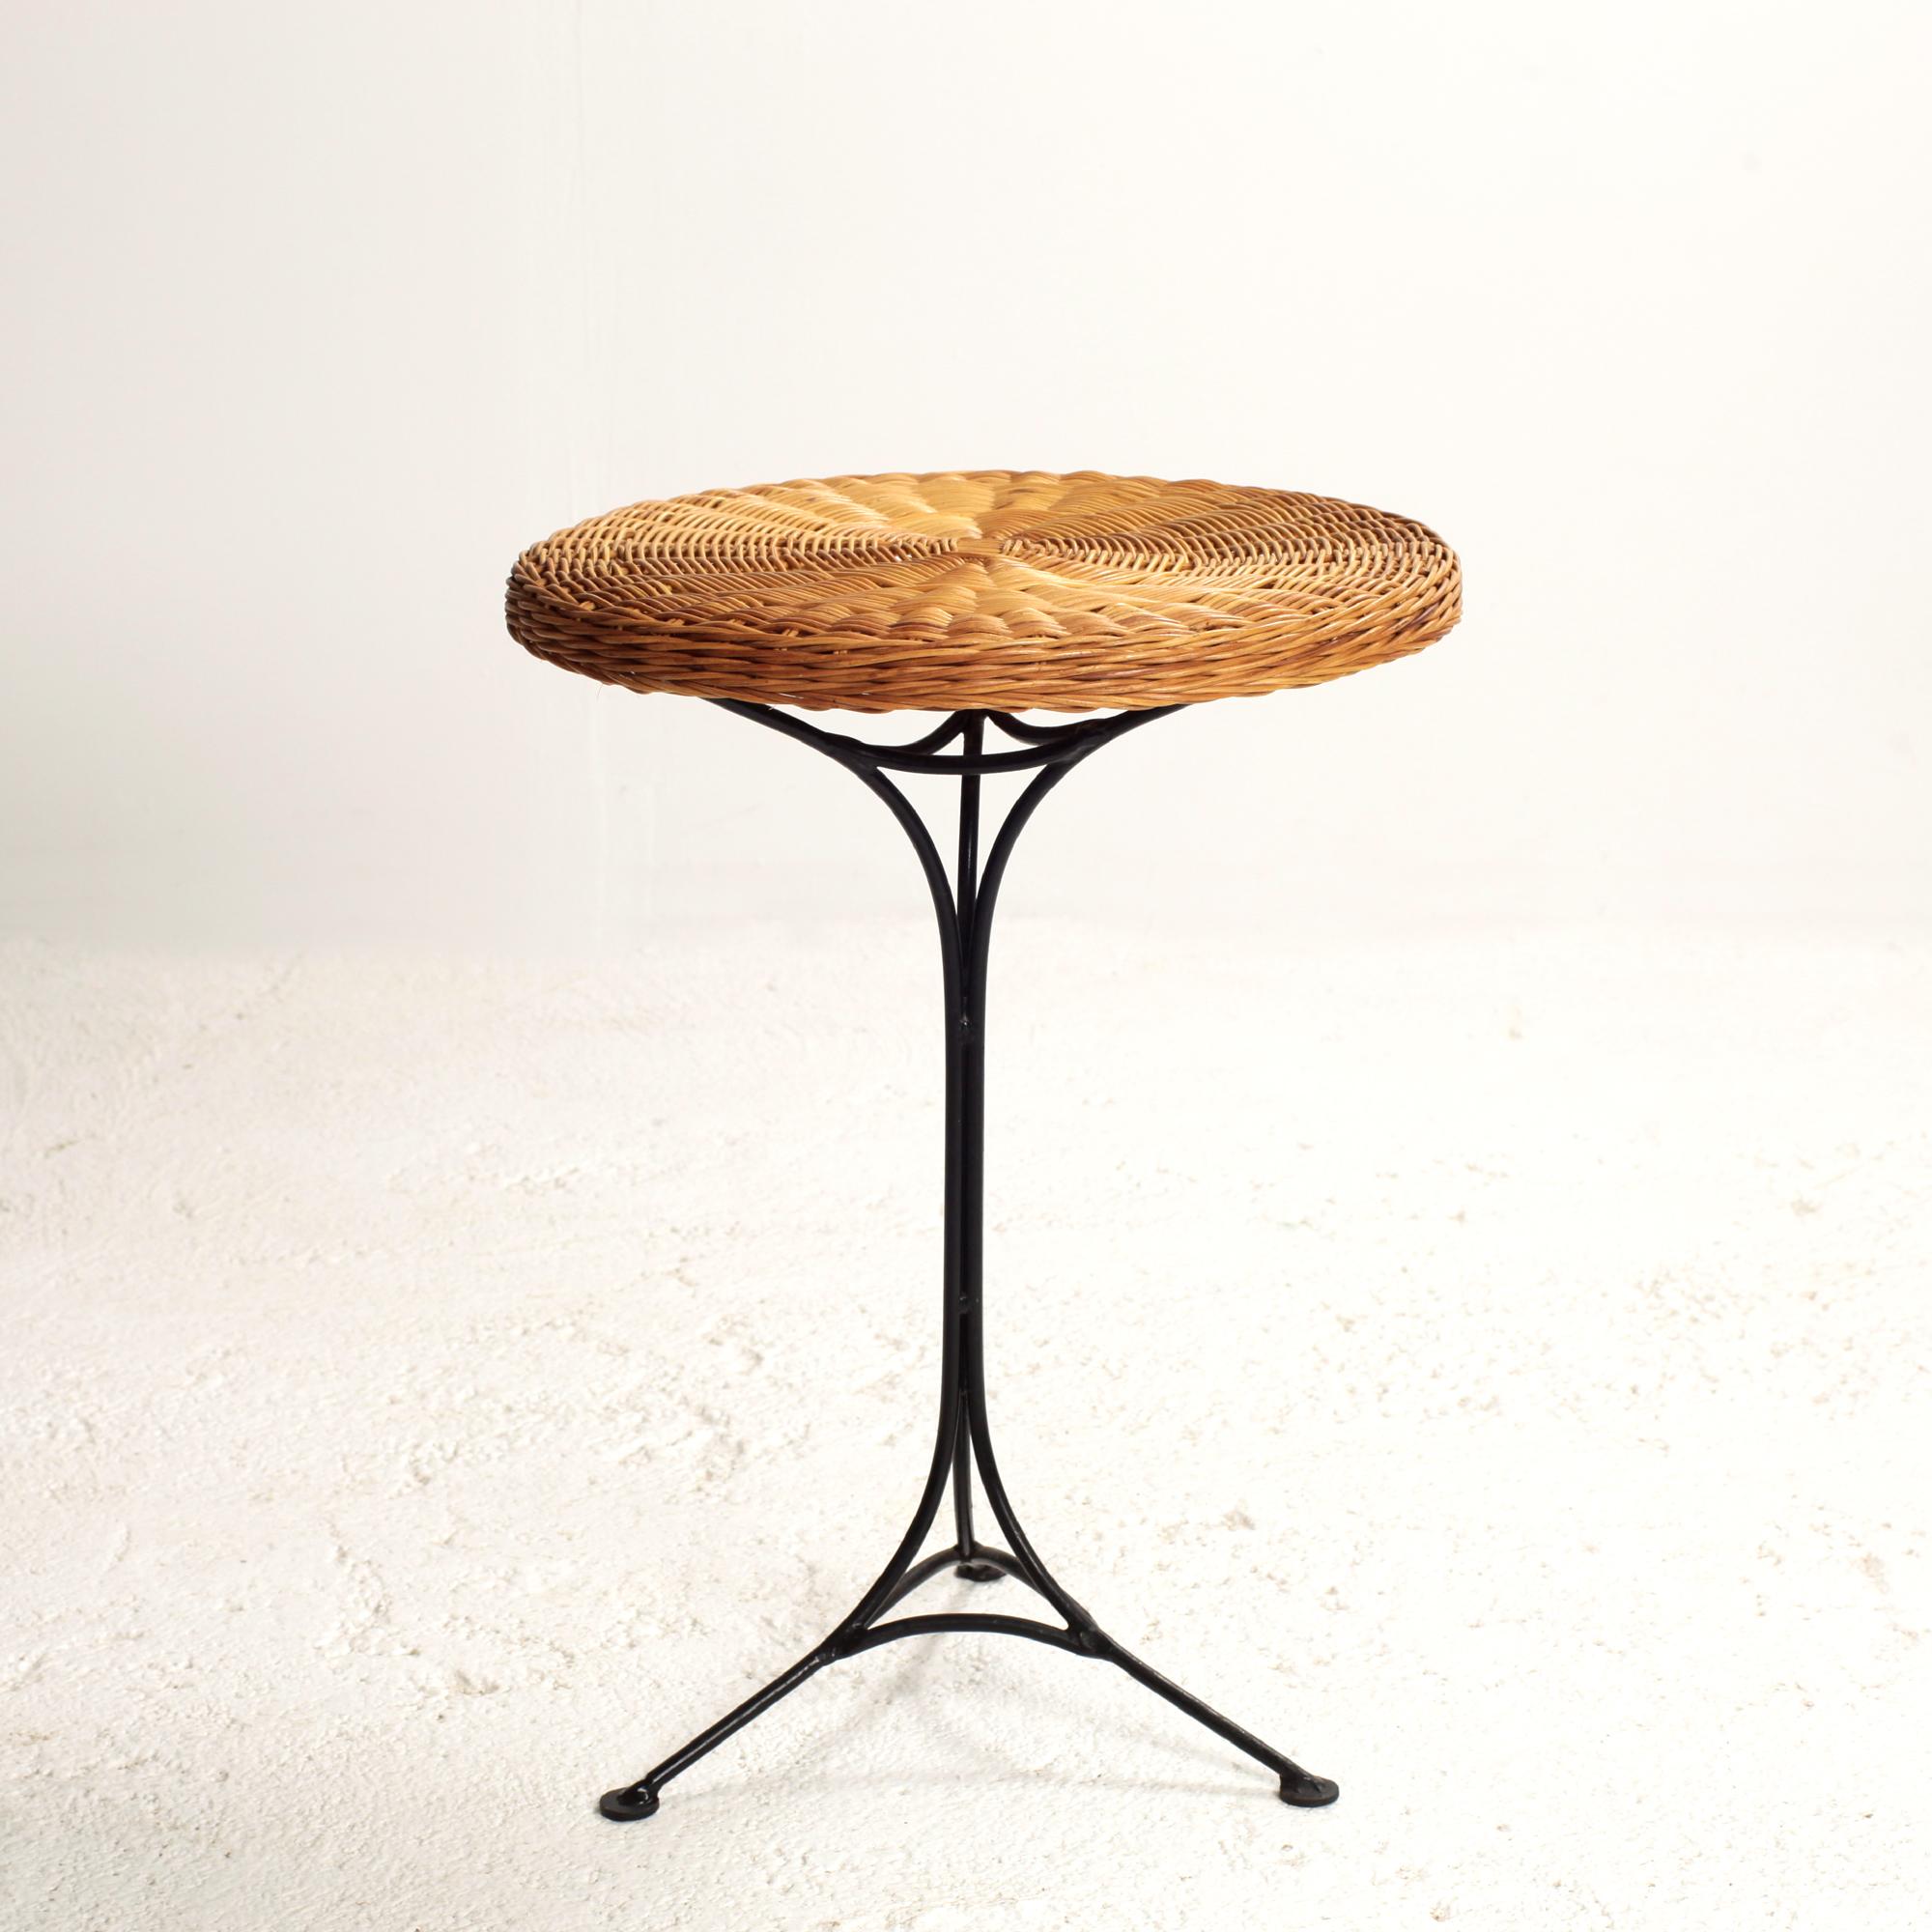 Mid-20th Century French Rattan and Black Metal Gueridon or side table circa 1950 For Sale